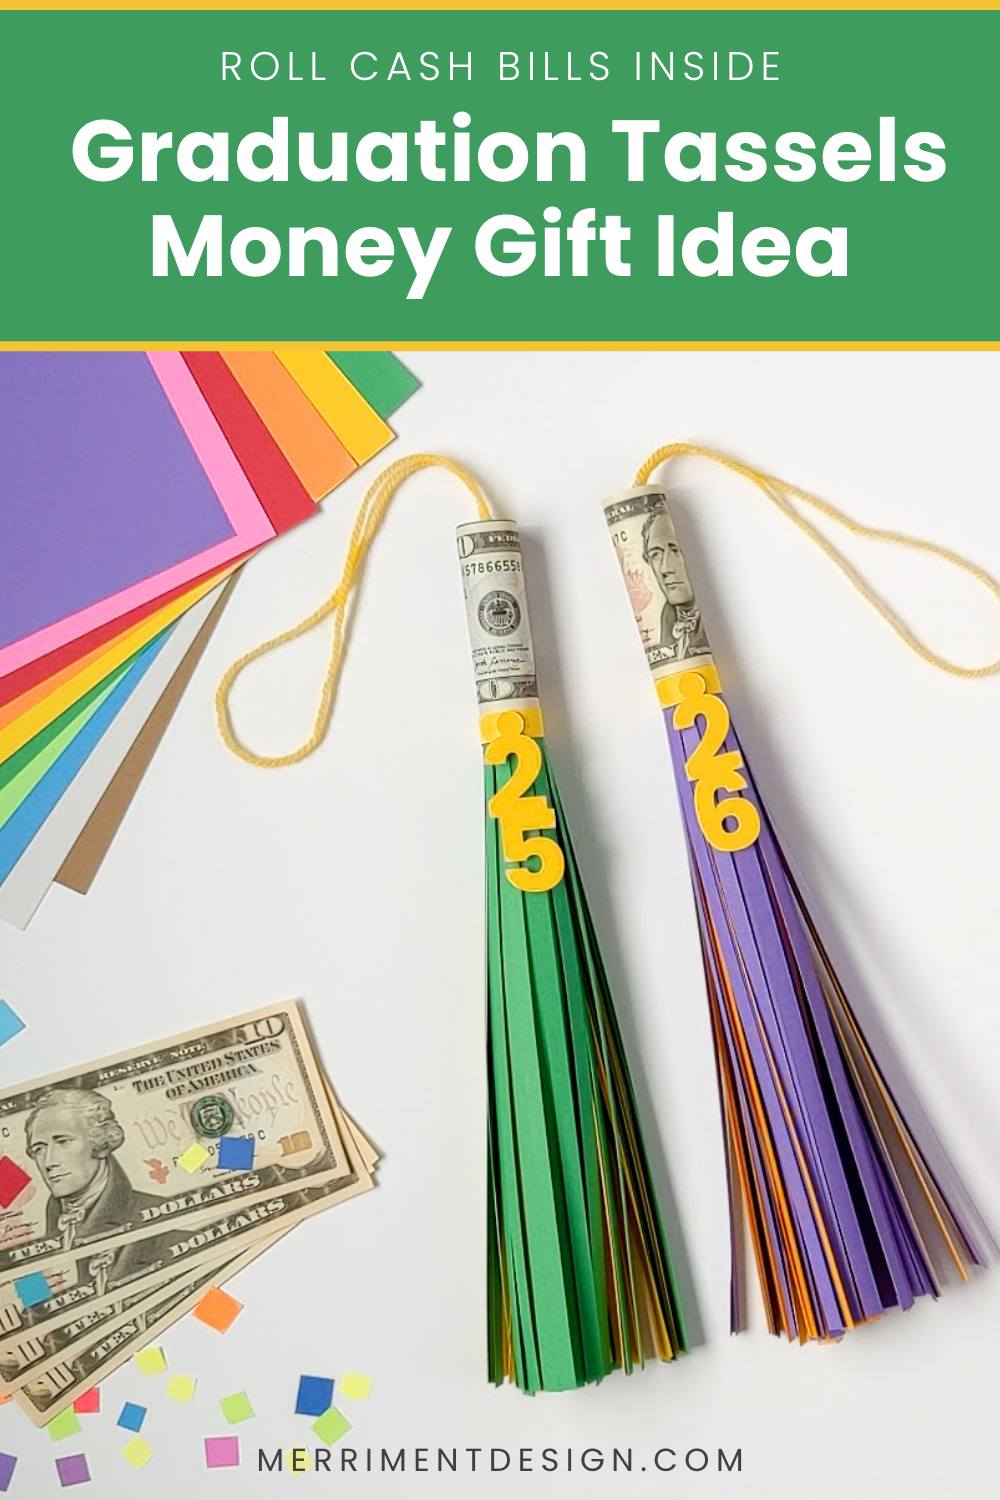 Big paper graduation tassels with cash rolled inside for a creative money graduation gift